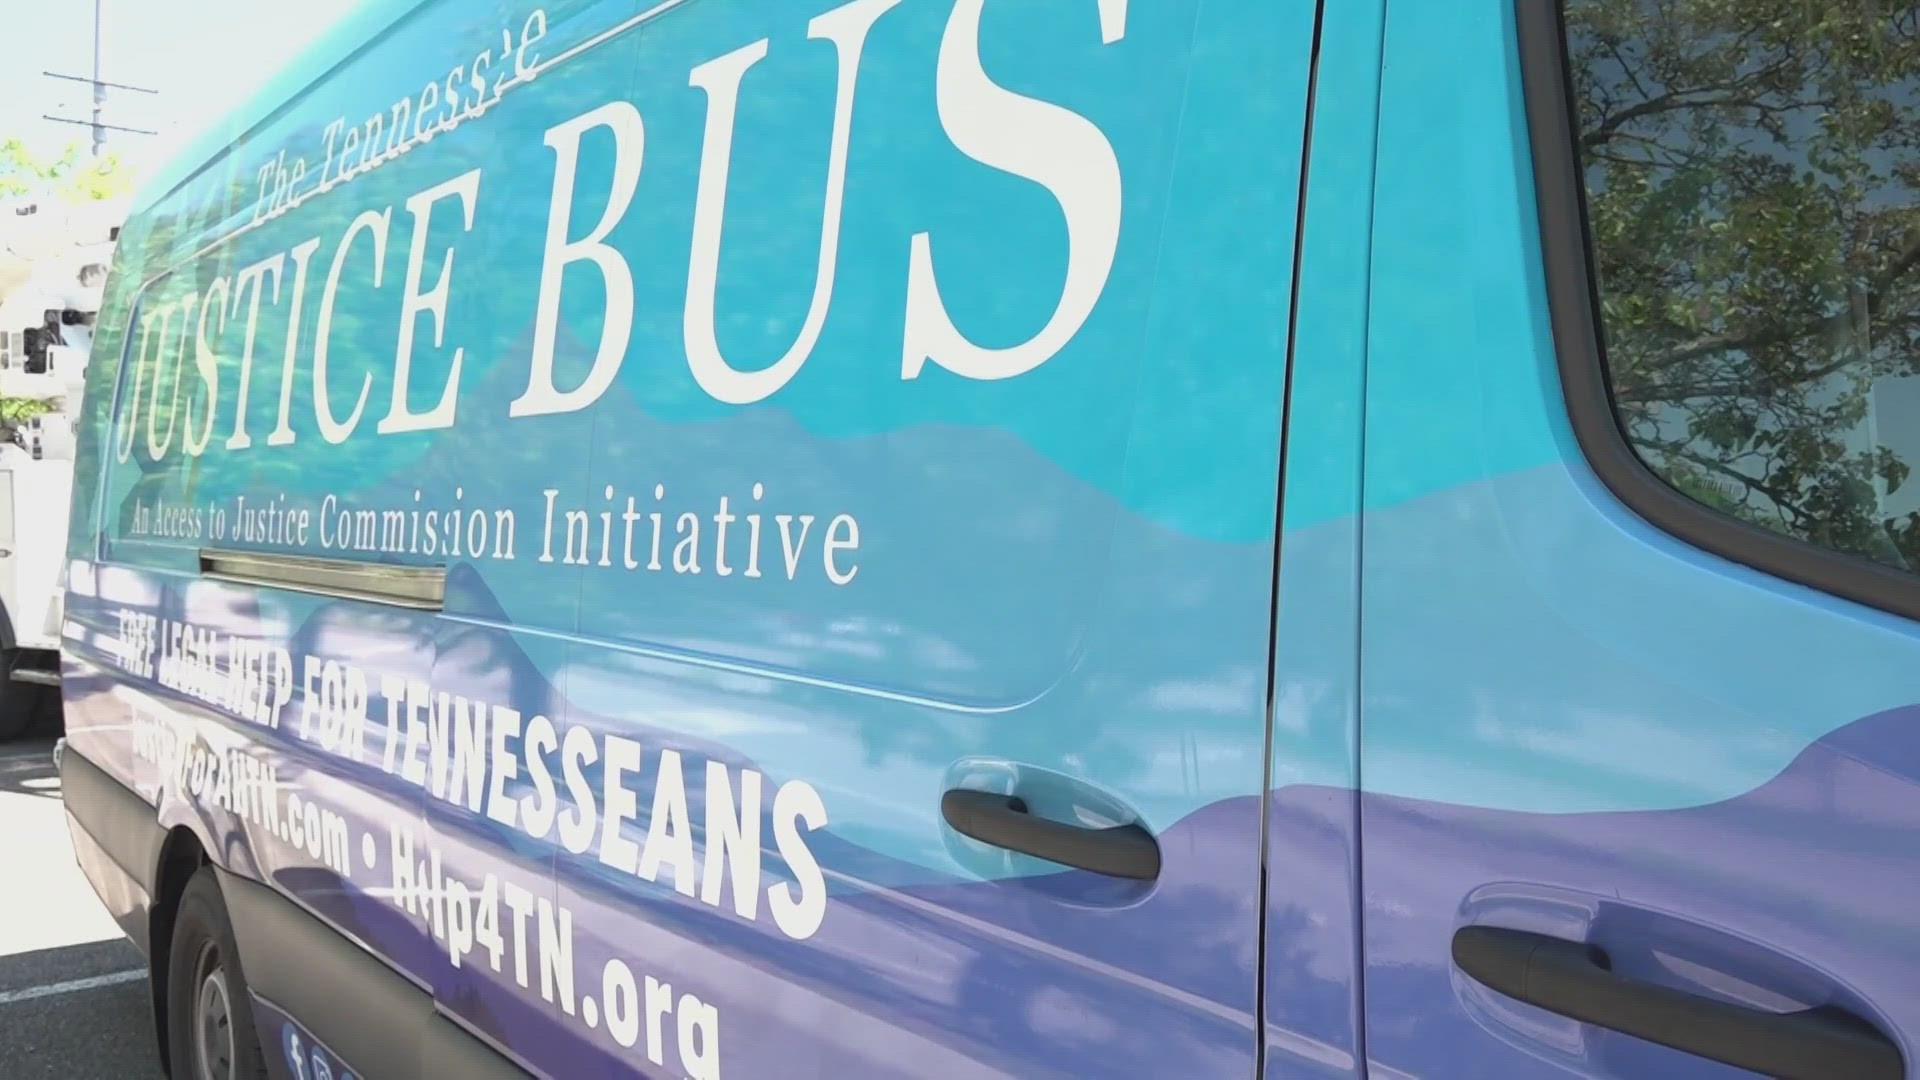 The Justice Bus is a Tennessee Supreme Court initiative that offers legal help all over the state.